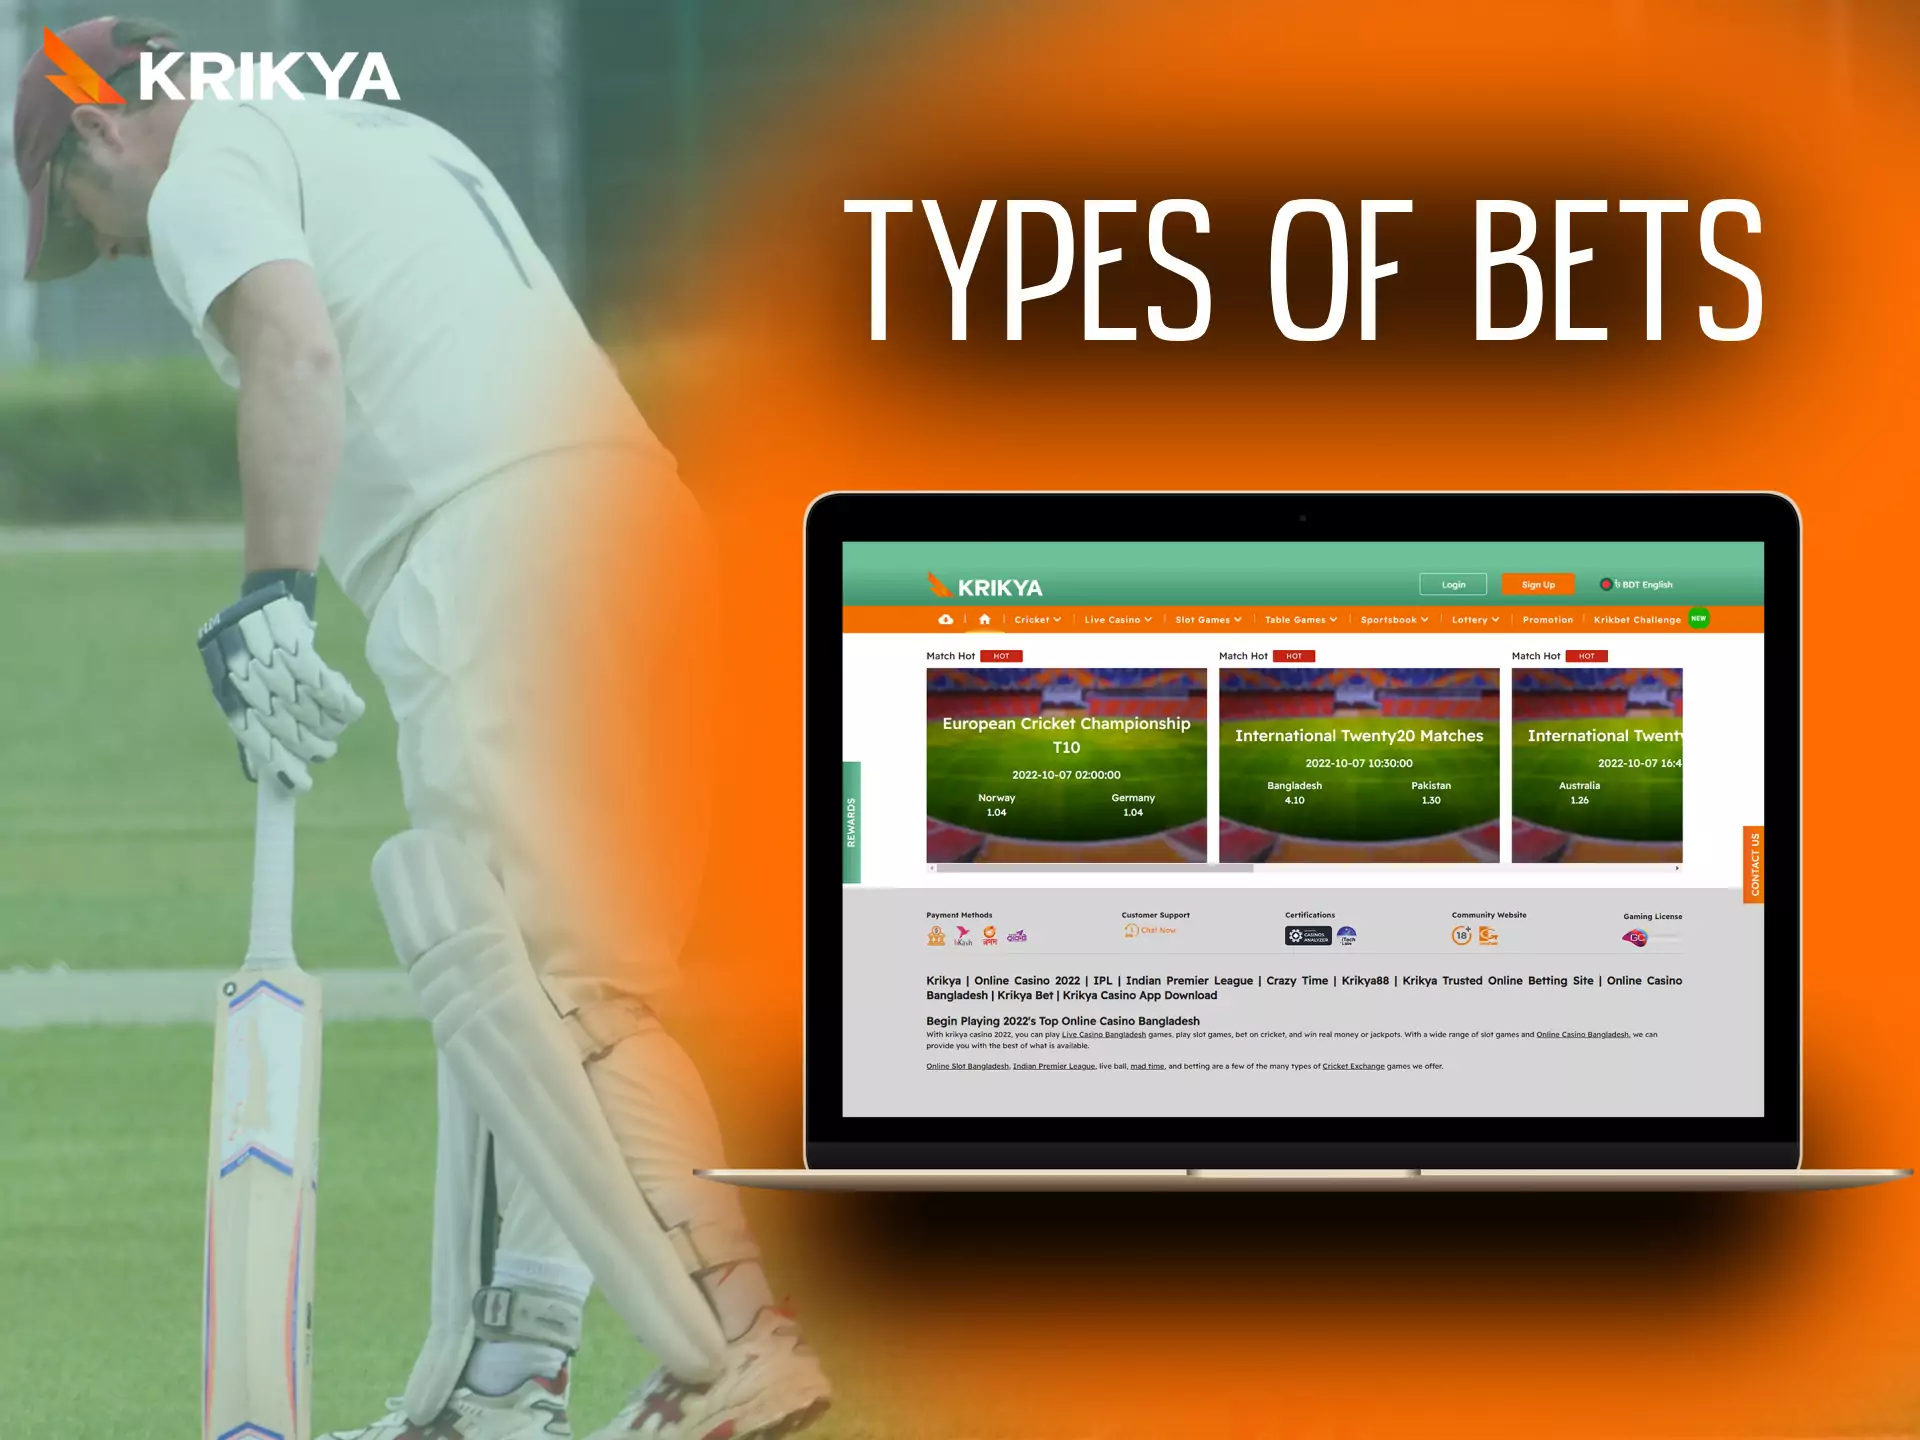 Krikya offers players to try different types of bets.